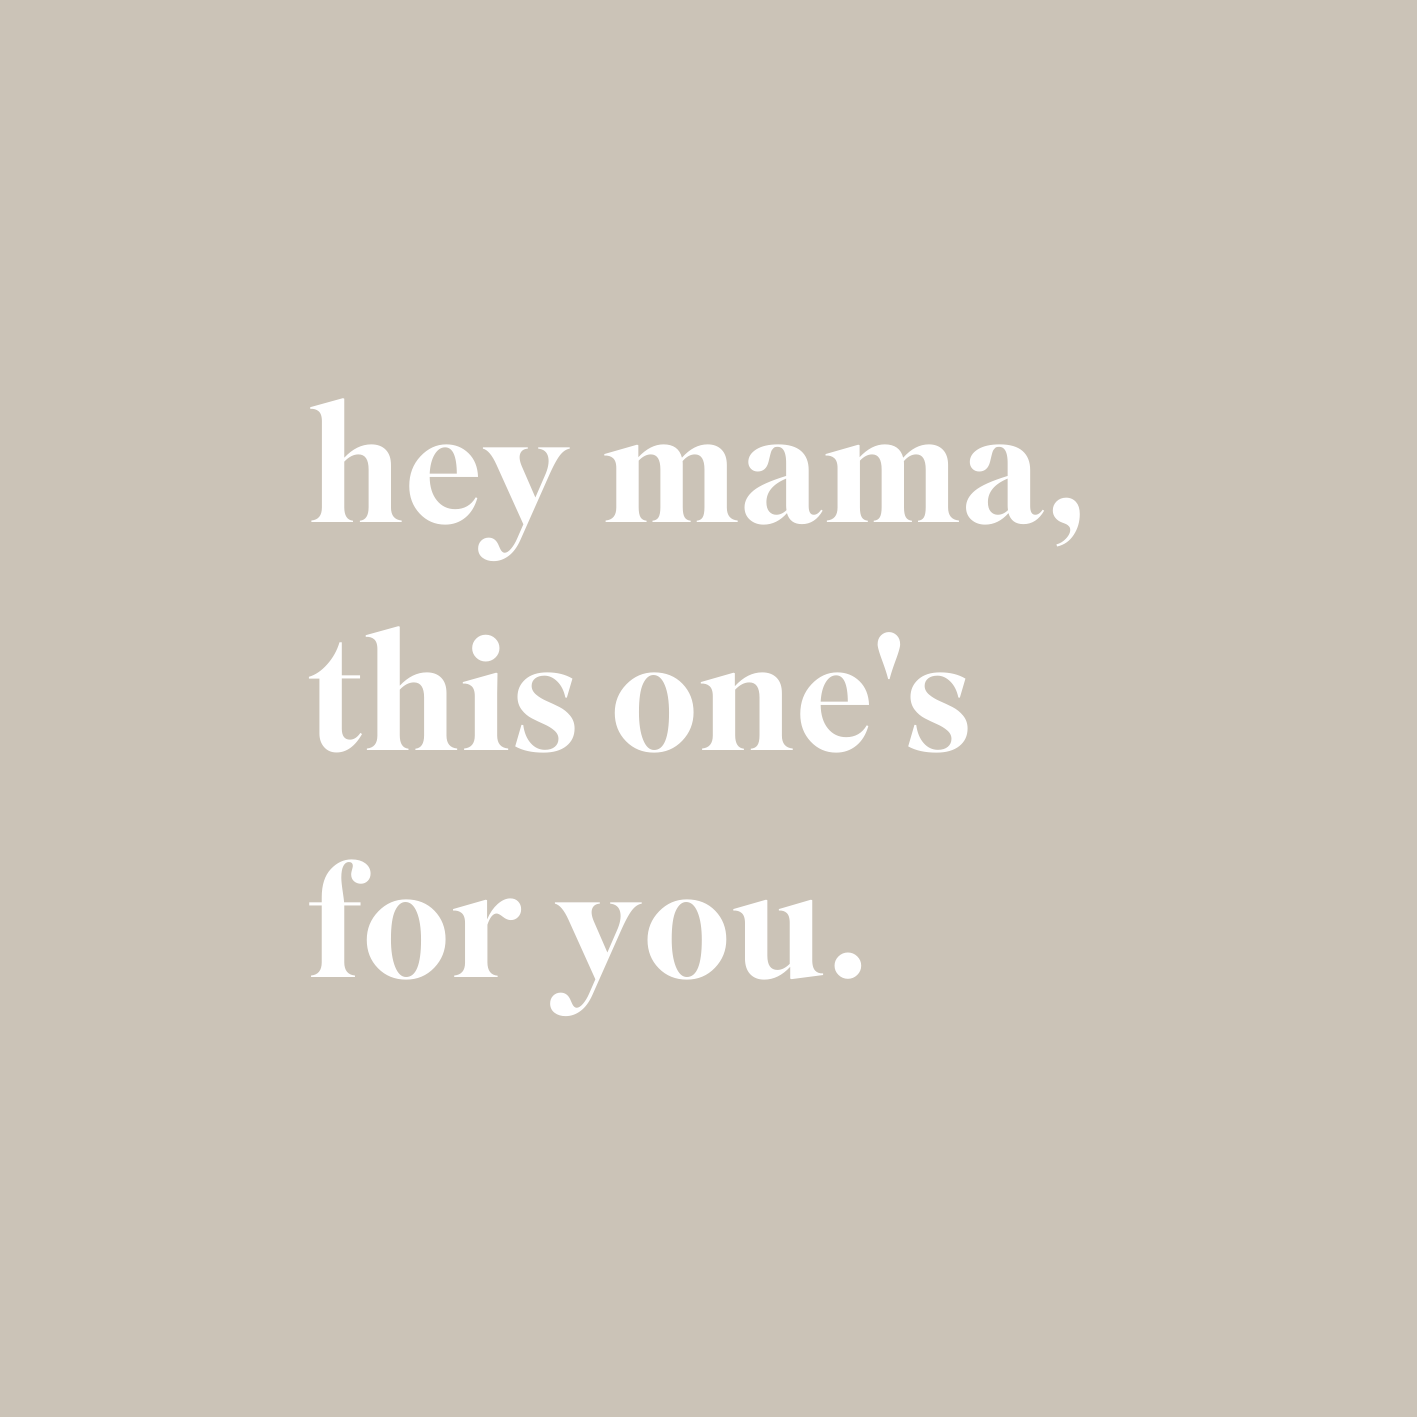 hey mama, this one's for you.